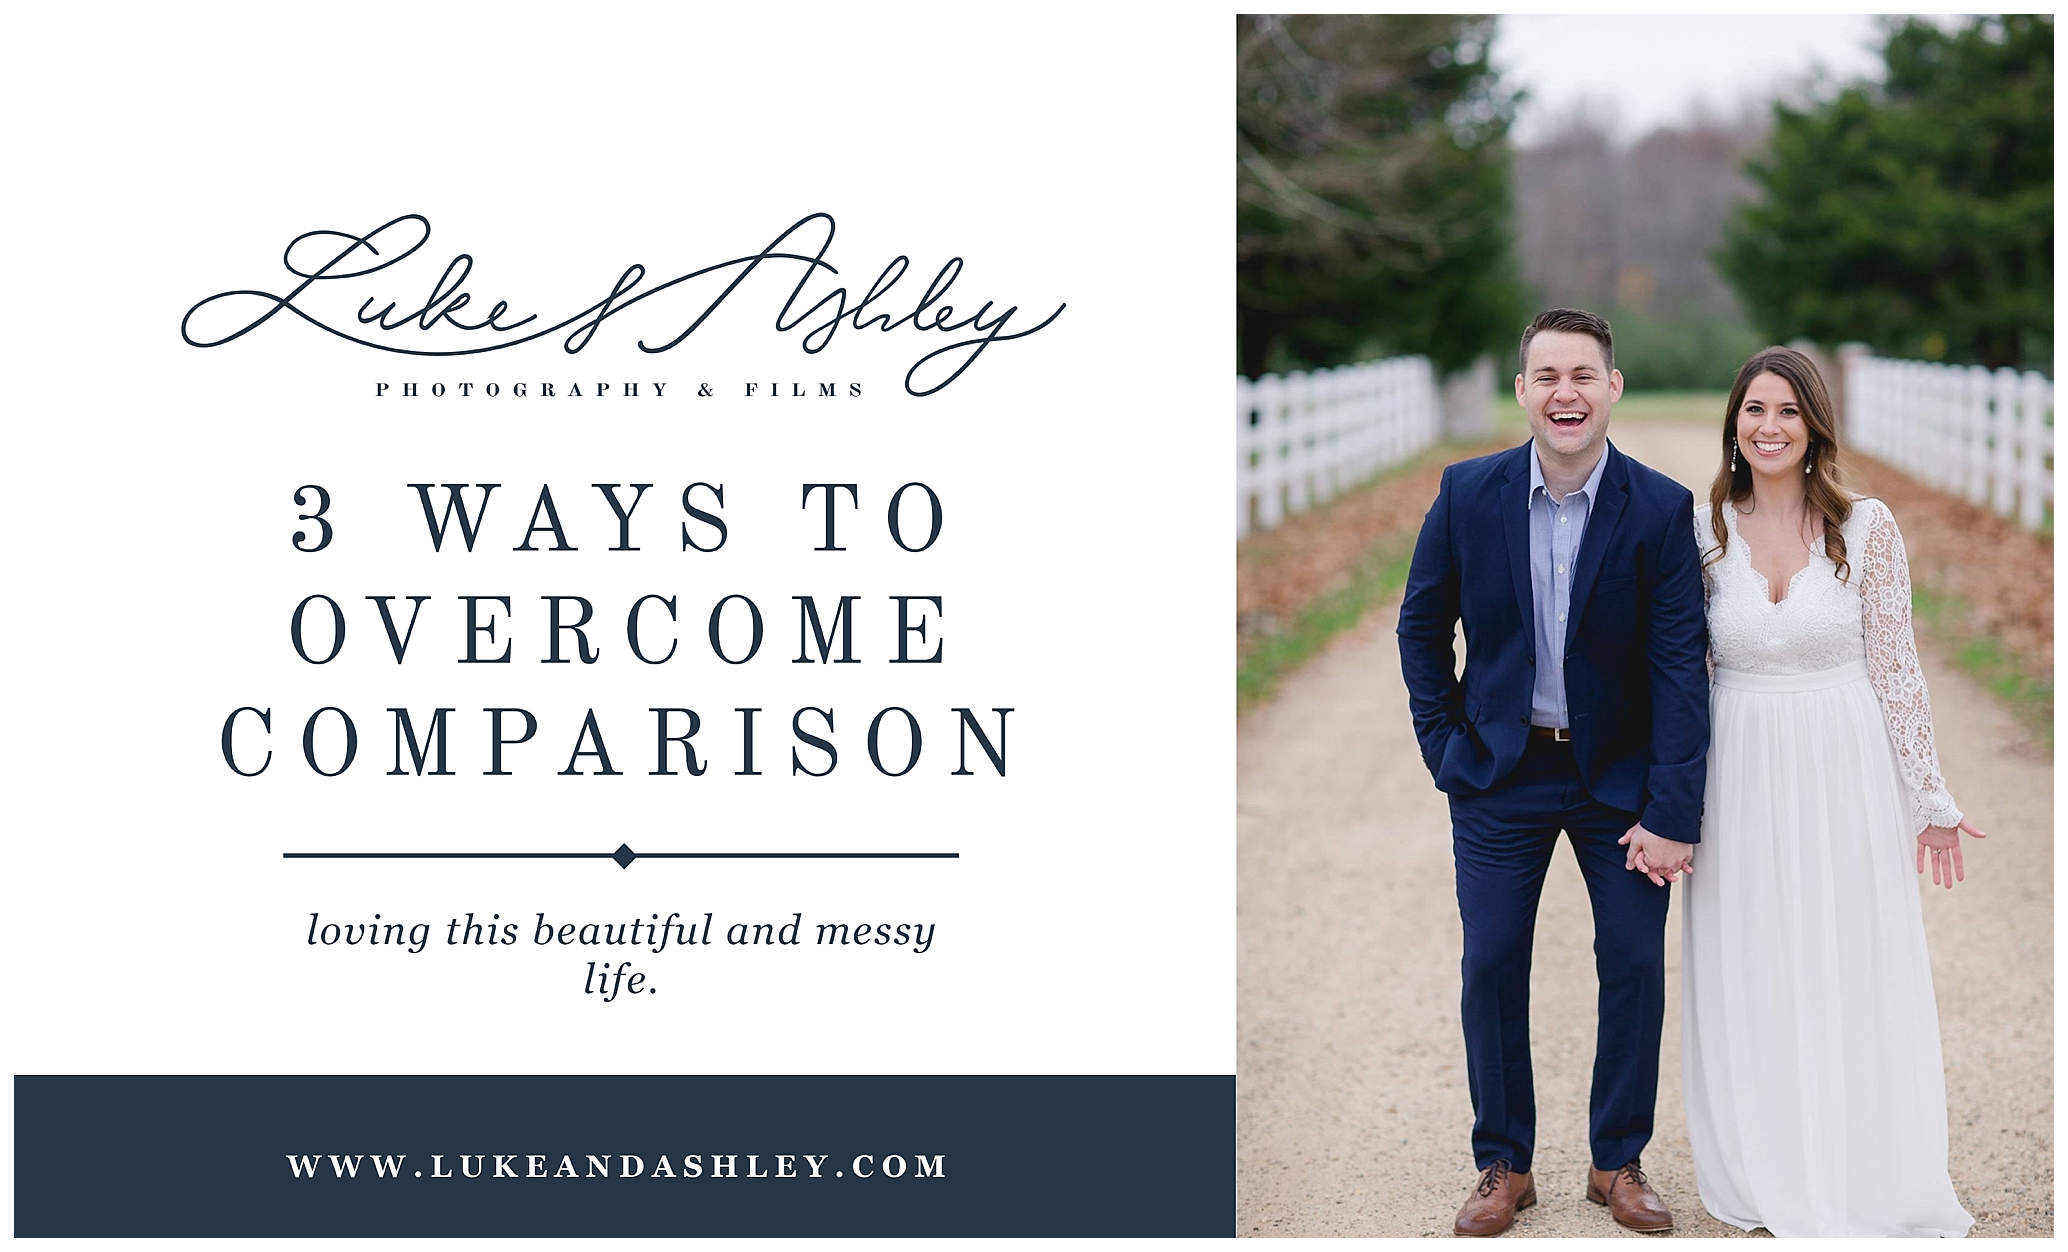 Three ways to overcome comparison in your business. Luke and Ashley Photography